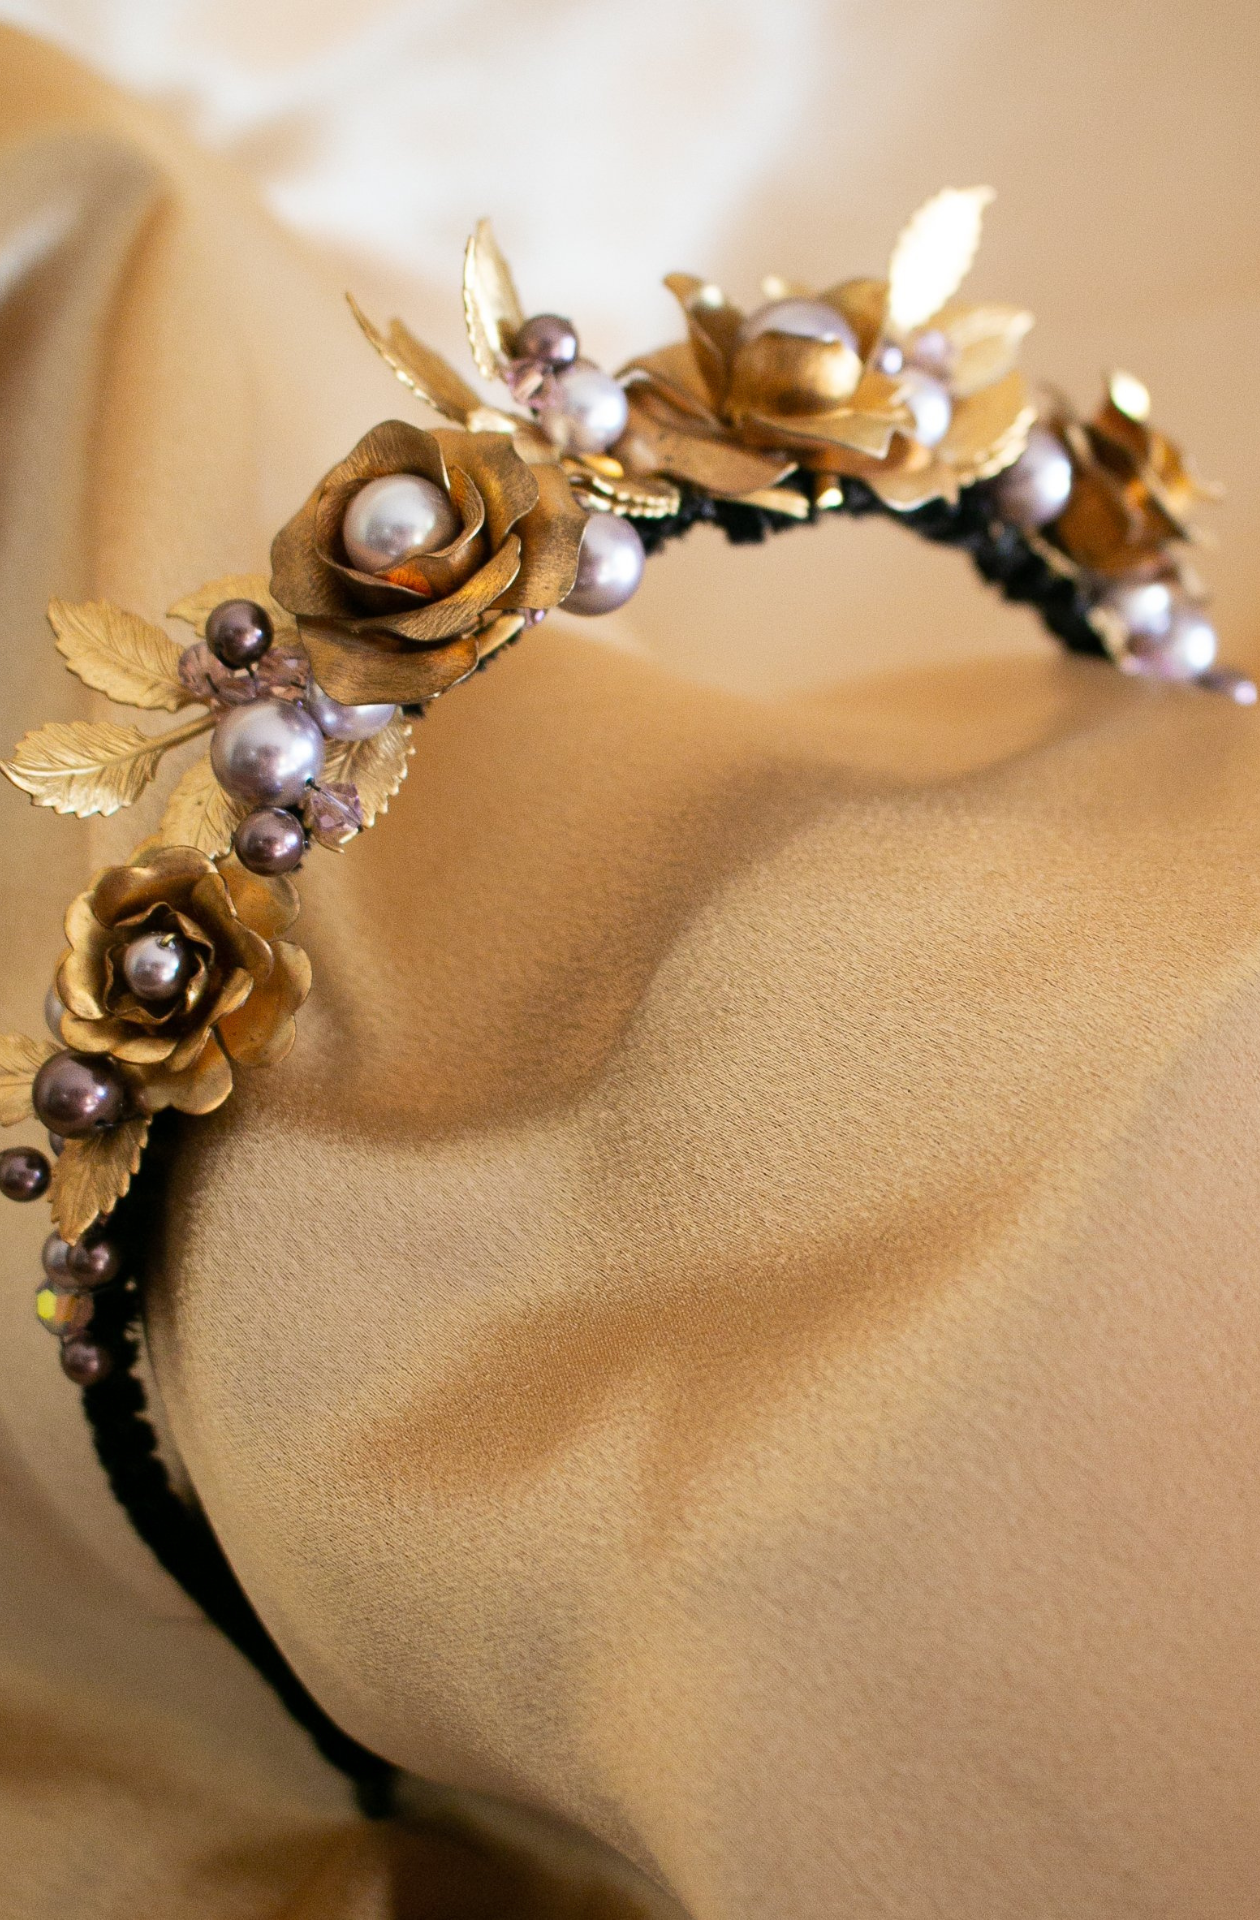 A corded black headband featuring golden roses and leaves sat atop, mixed in with swarovski crystals and pearls of different shades